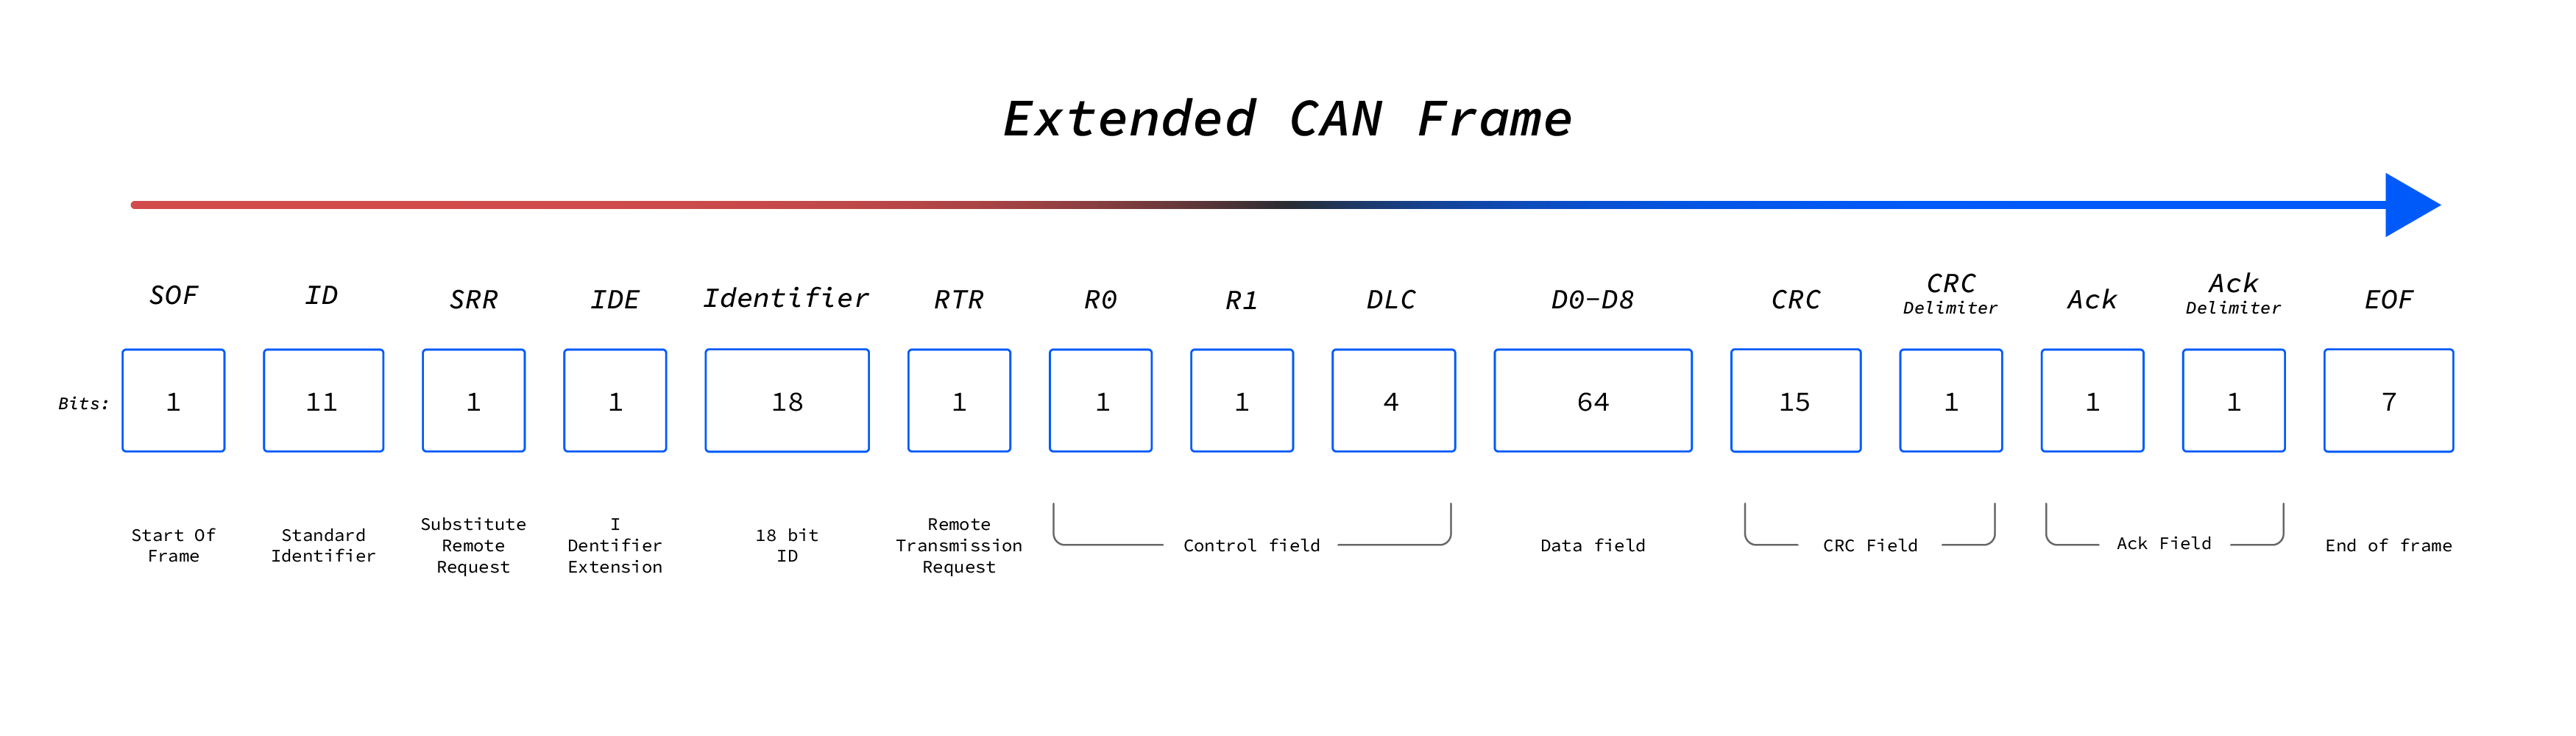 Extended CAN frame explained in visualization